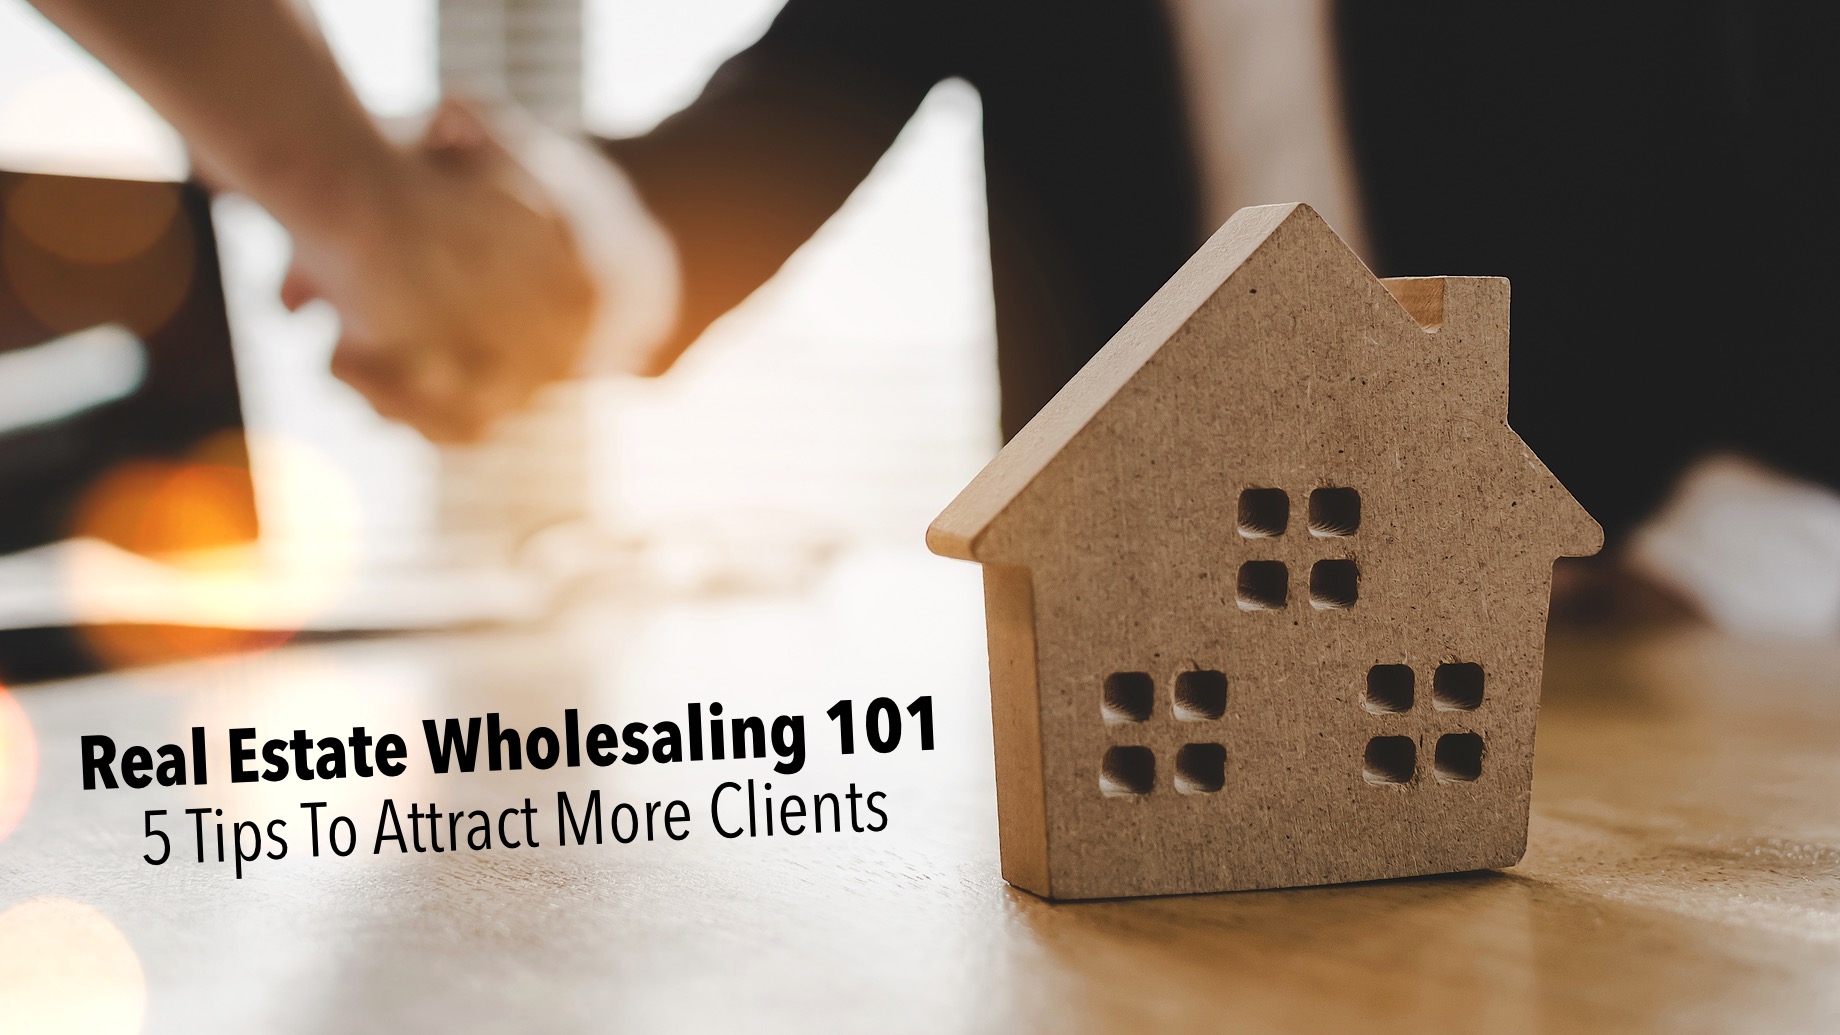 Real Estate Wholesaling 101 – 5 Tips To Attract More Clients